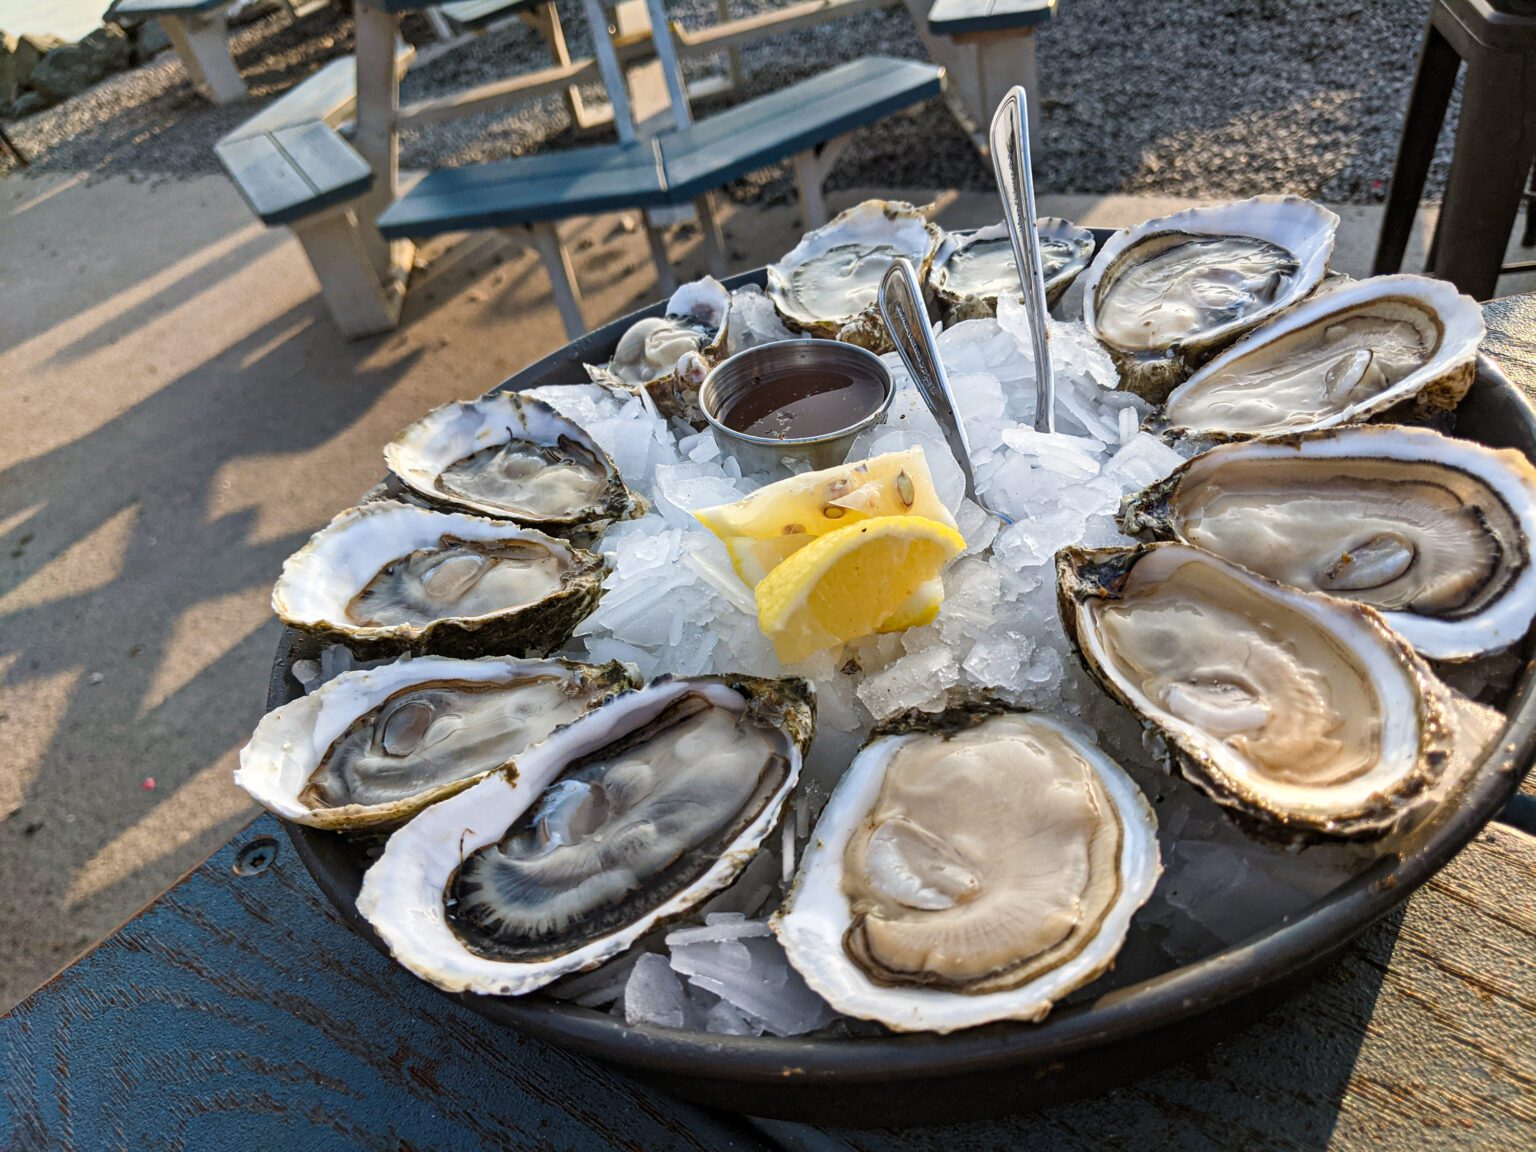 On a recent visit to the Samish Oyster Bar at Taylor Shellfish Farms